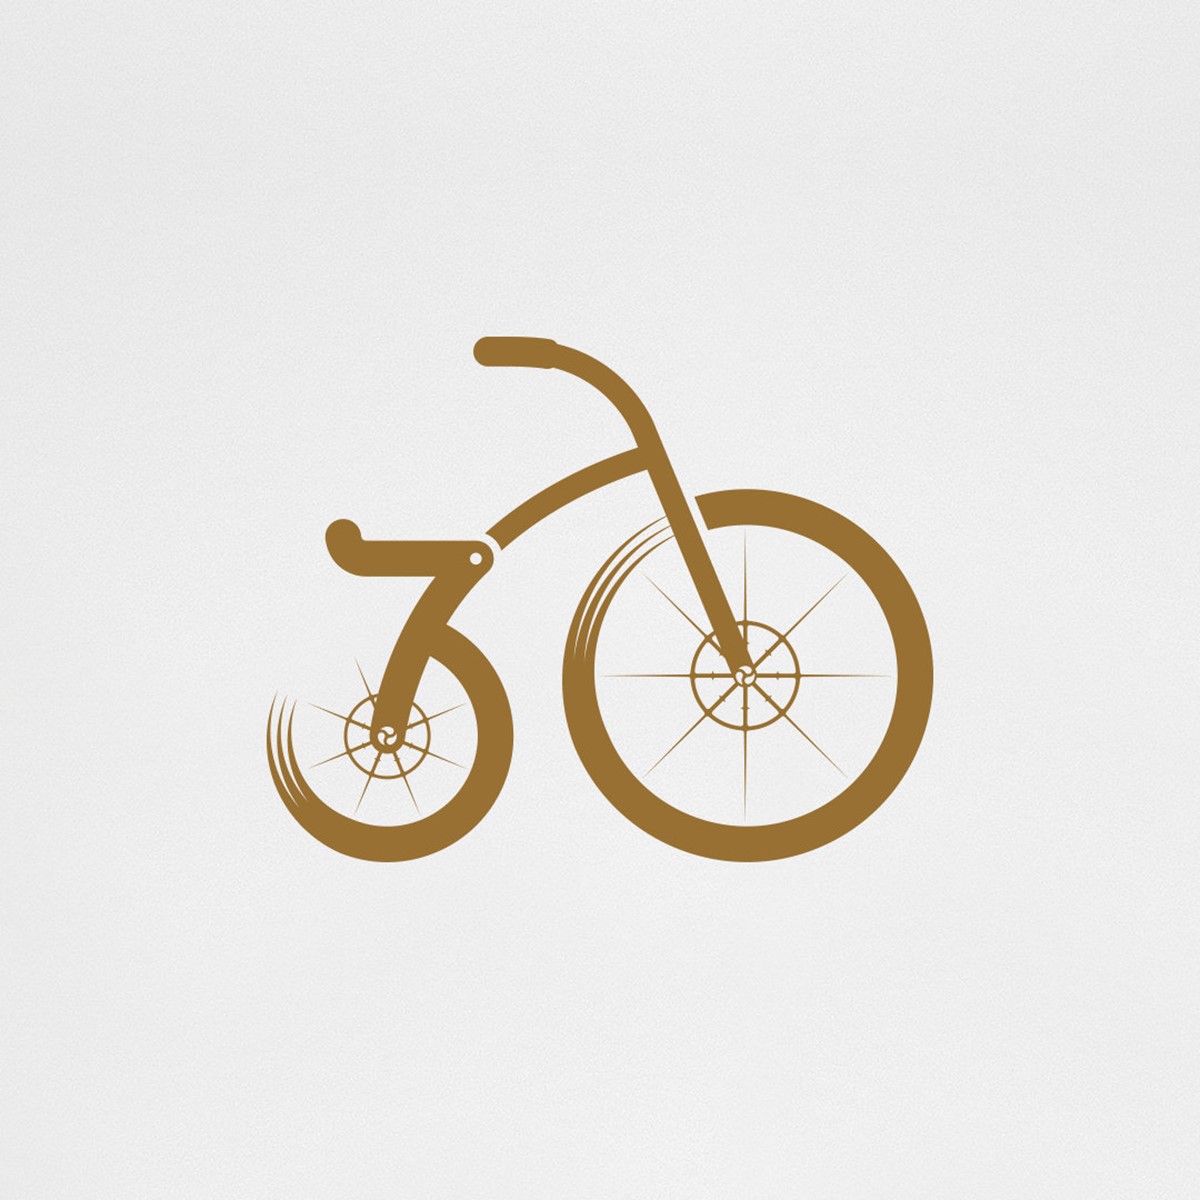 Tricycle magazine. 30th anniversary. Typographic trike logo - gold. Design by Superfried.